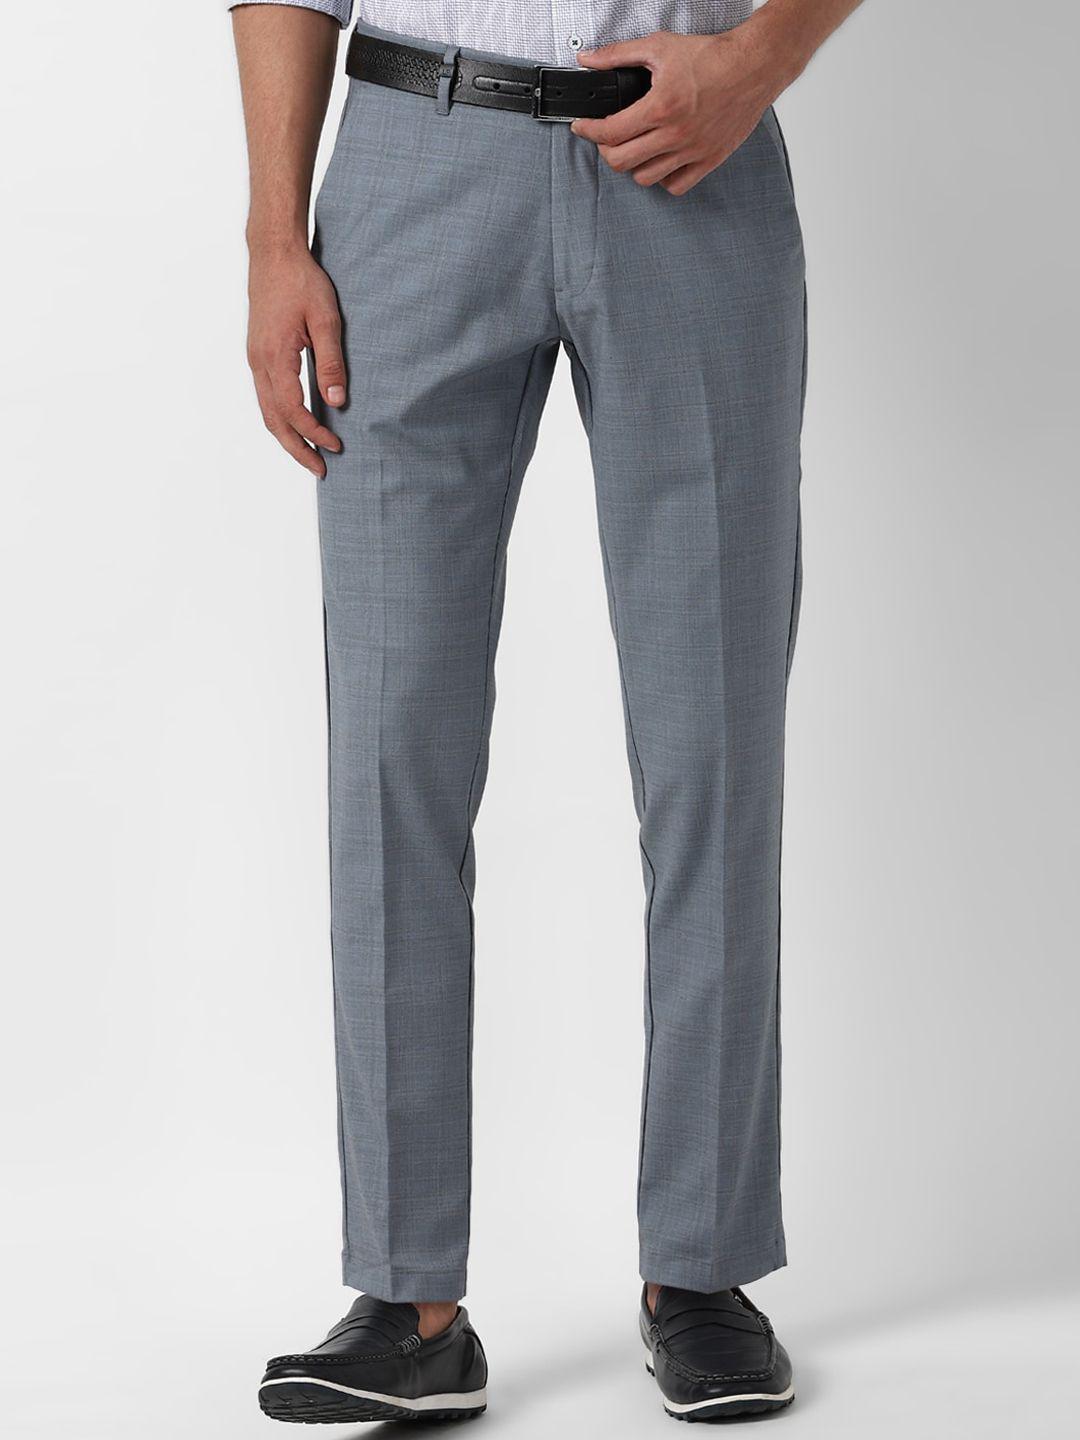 louis-philippe-sport-men-grey-textured-formal-trousers